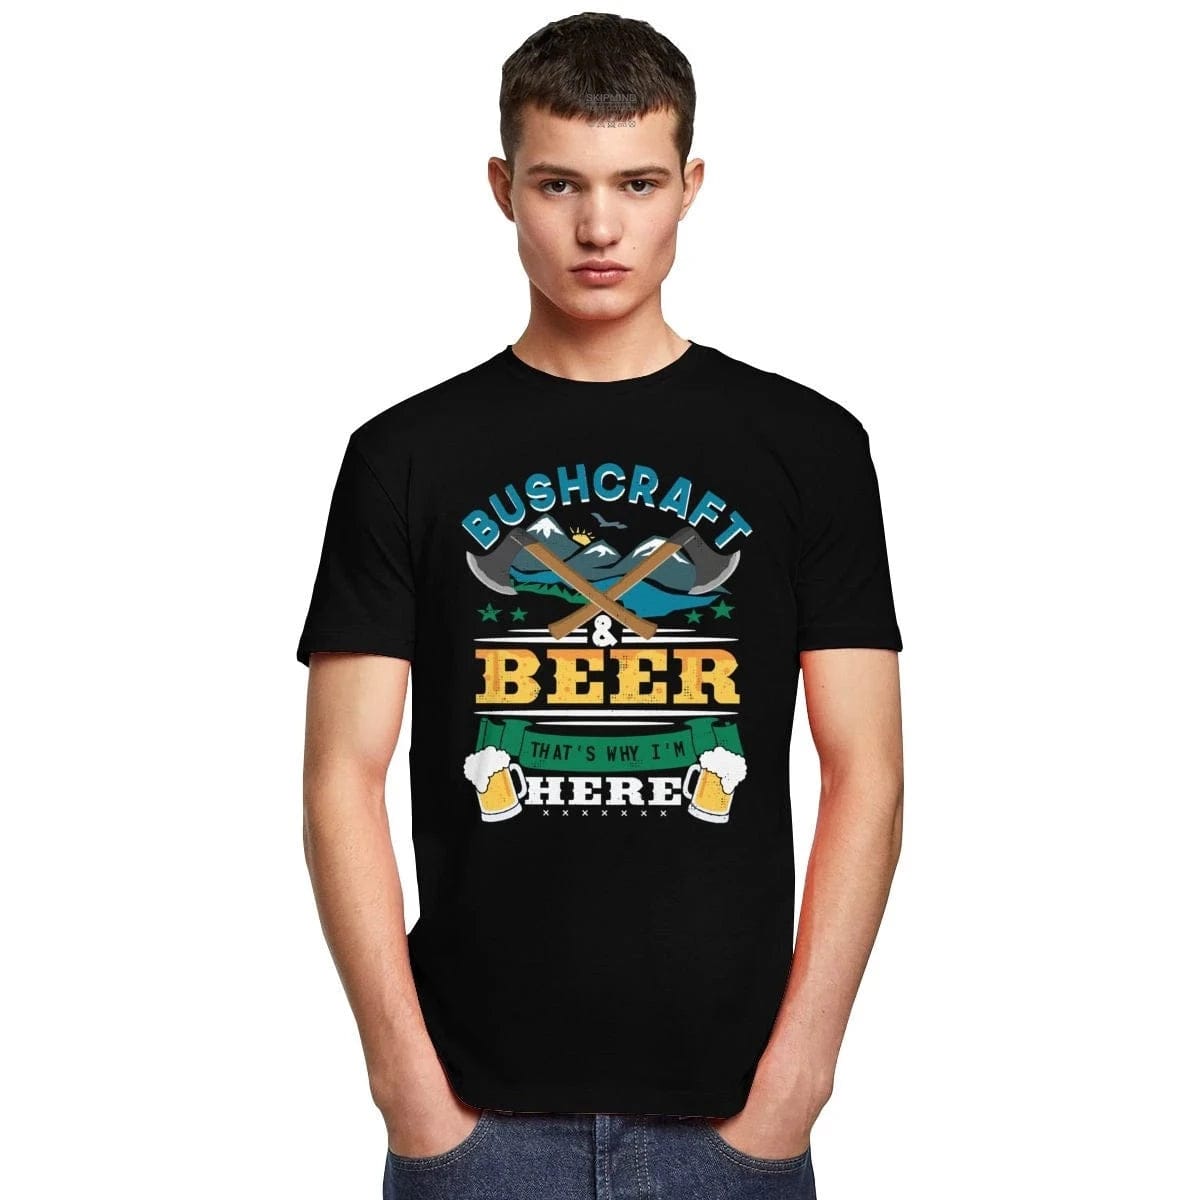 T-Shirt "Bushcraft & Beer That Is Why I Am Here"